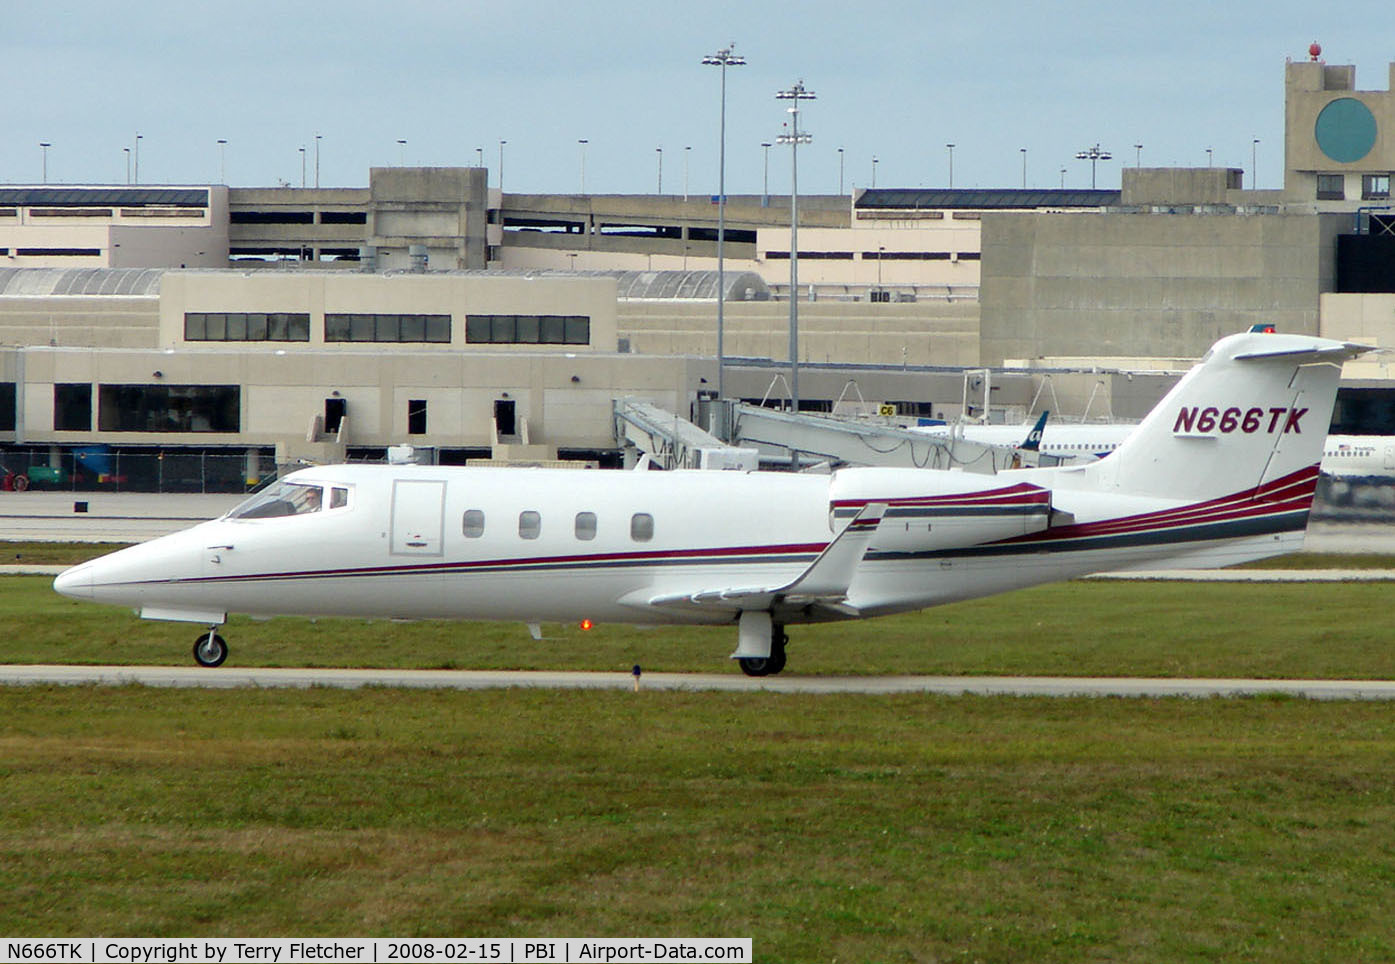 N666TK, 1982 Gates Learjet 55 C/N 038, The business aircraft traffic at West Palm Beach on the Friday before President's Day always provides the aviation enthusiast / photographer with a treat